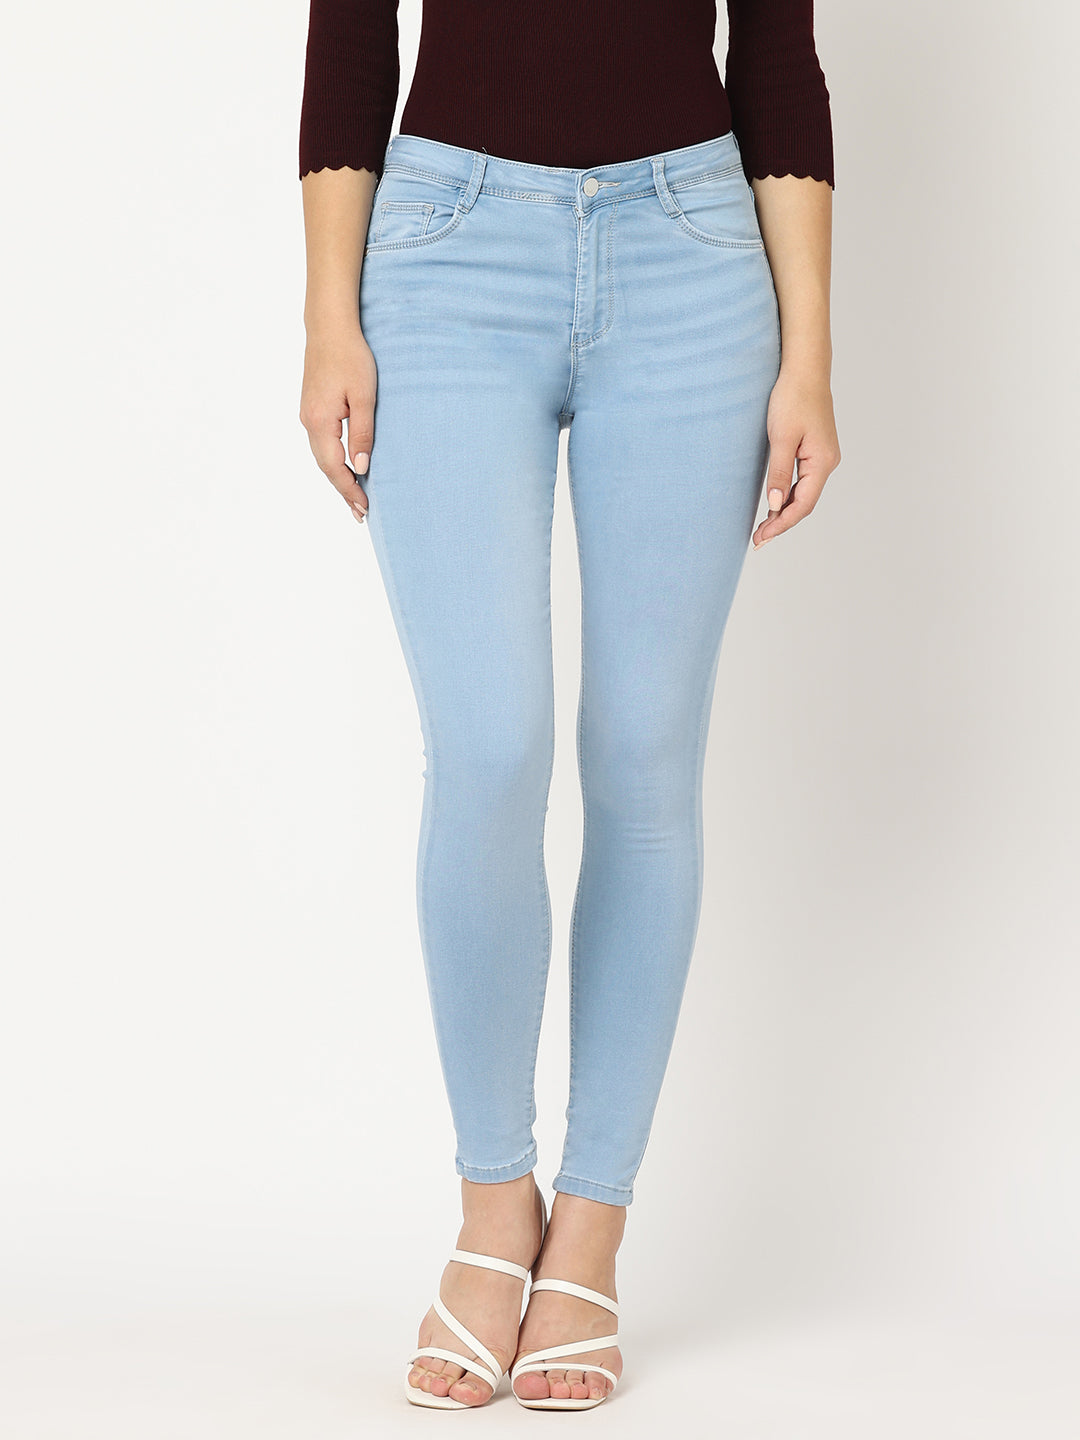 Women High-Rise Skinny Ankle Length Jeans